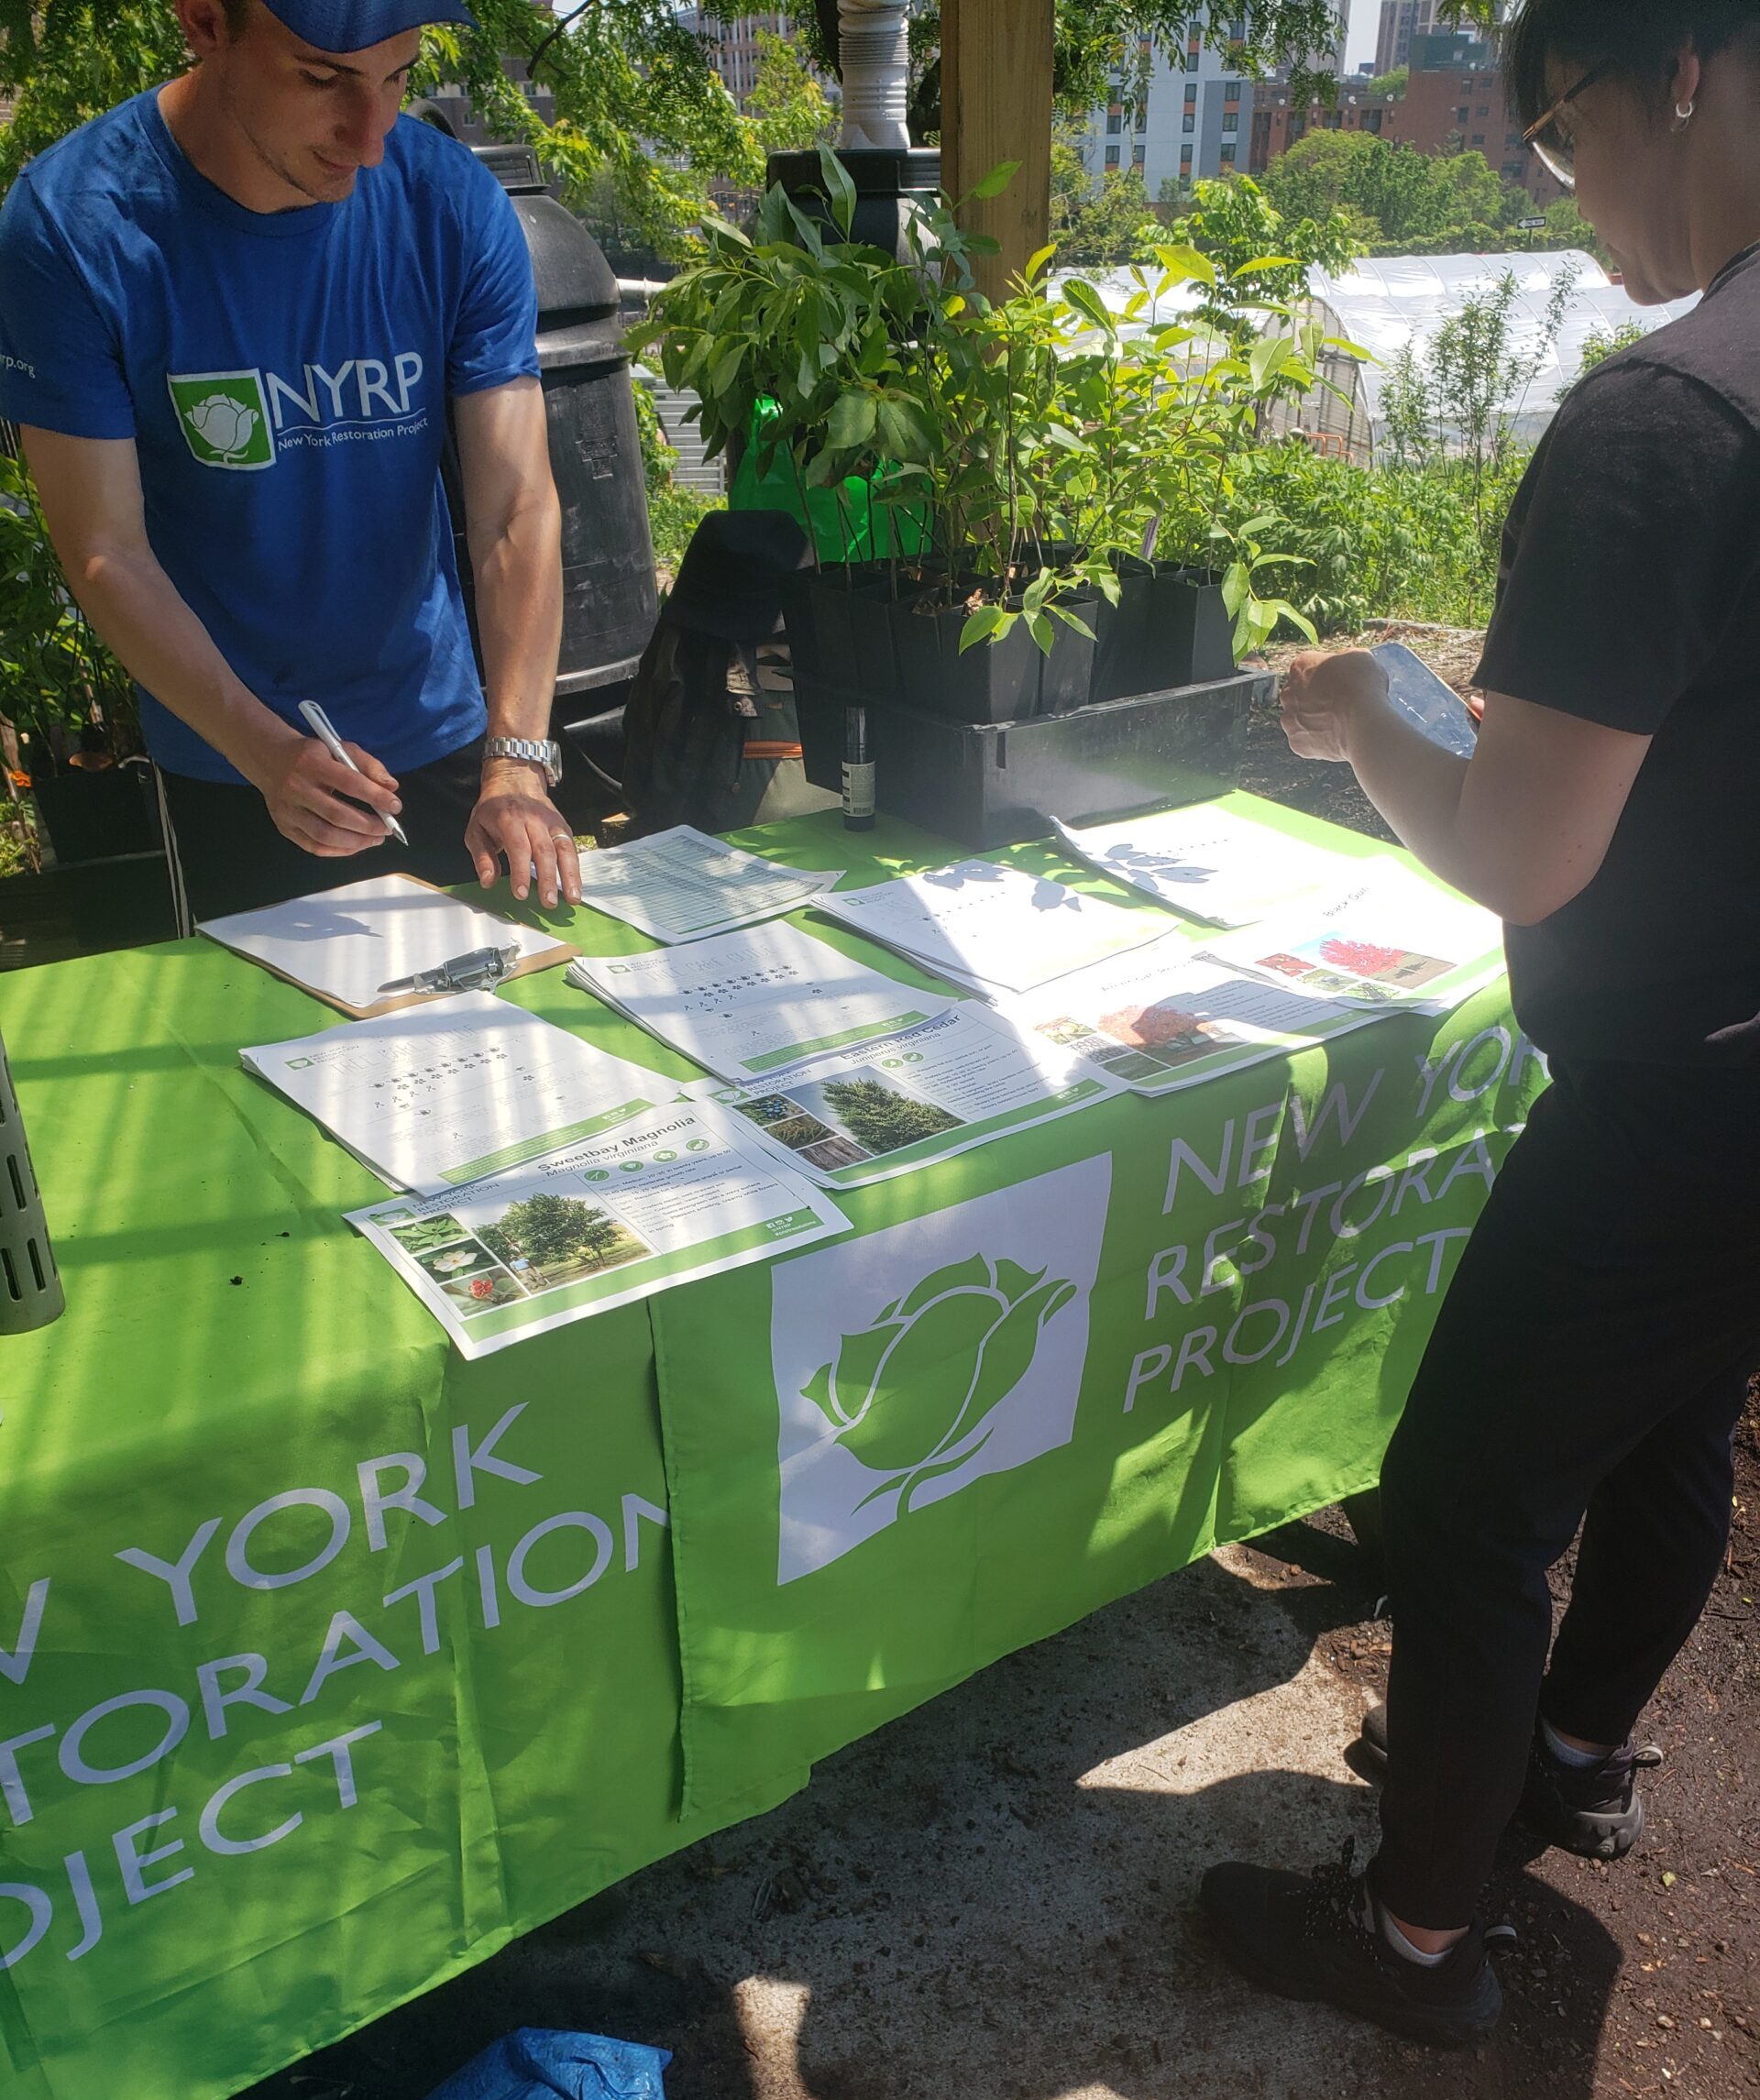 A man in a blue NYRP shirt fills out a form at a table with trees in pots on top. A visitor stands in front of the table.